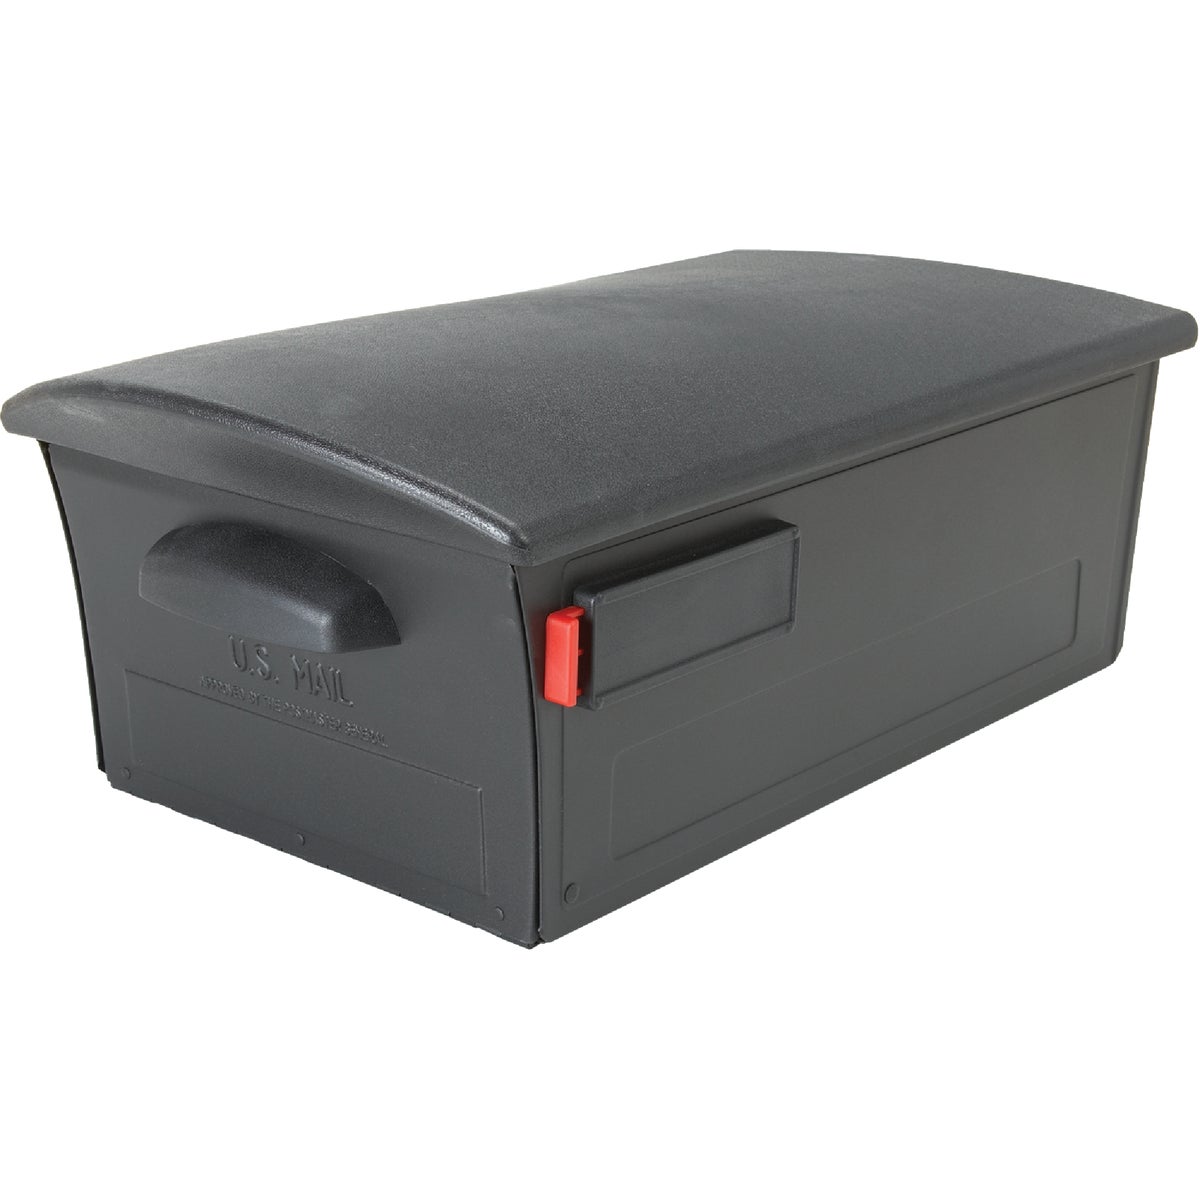 Item 204285, The locking Mailsafe mailbox provides excellent security in an attractive 